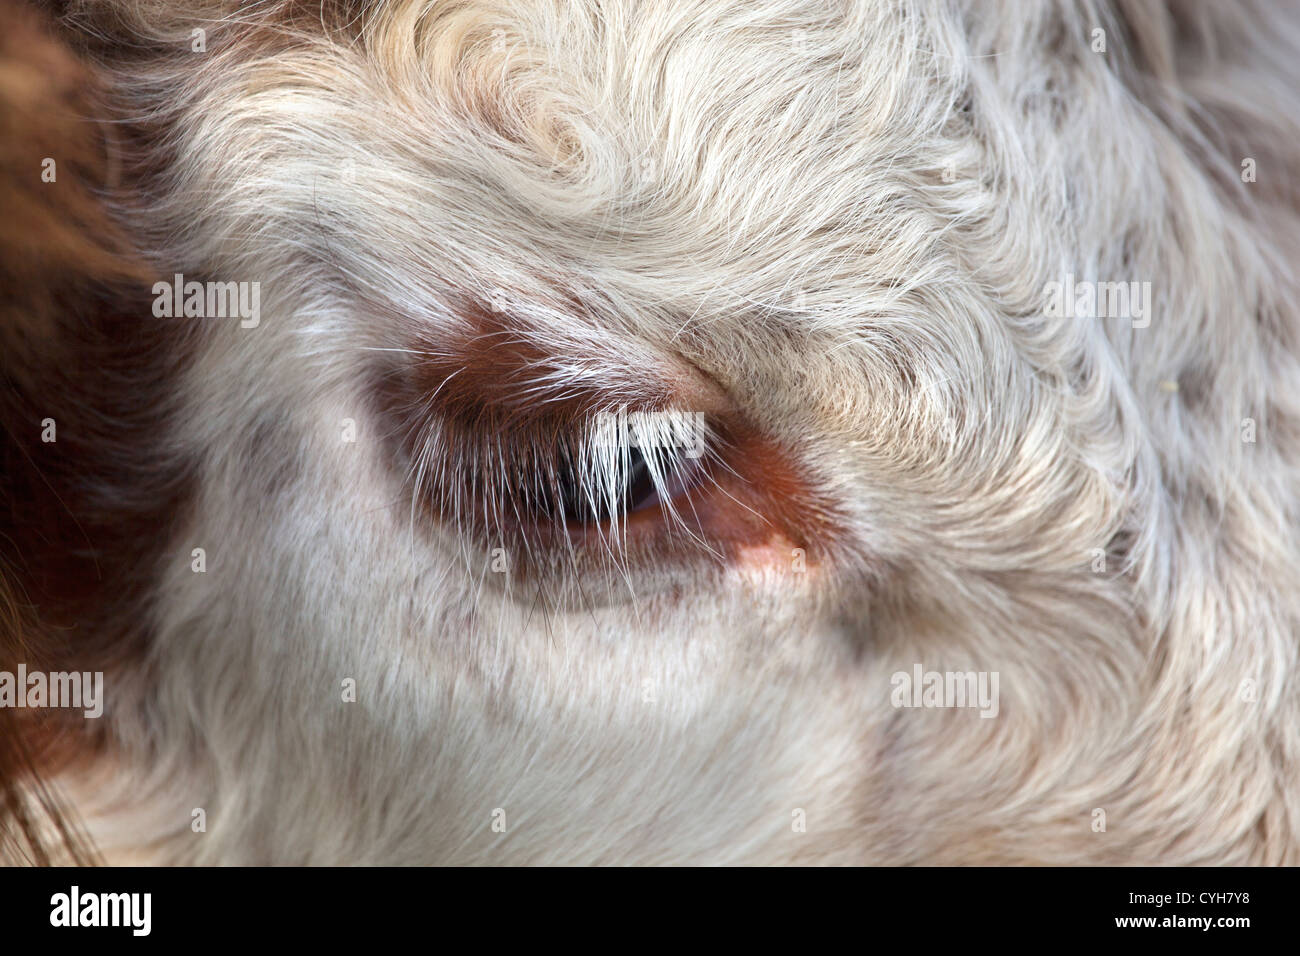 Close-up of Cows Eye Stock Photo